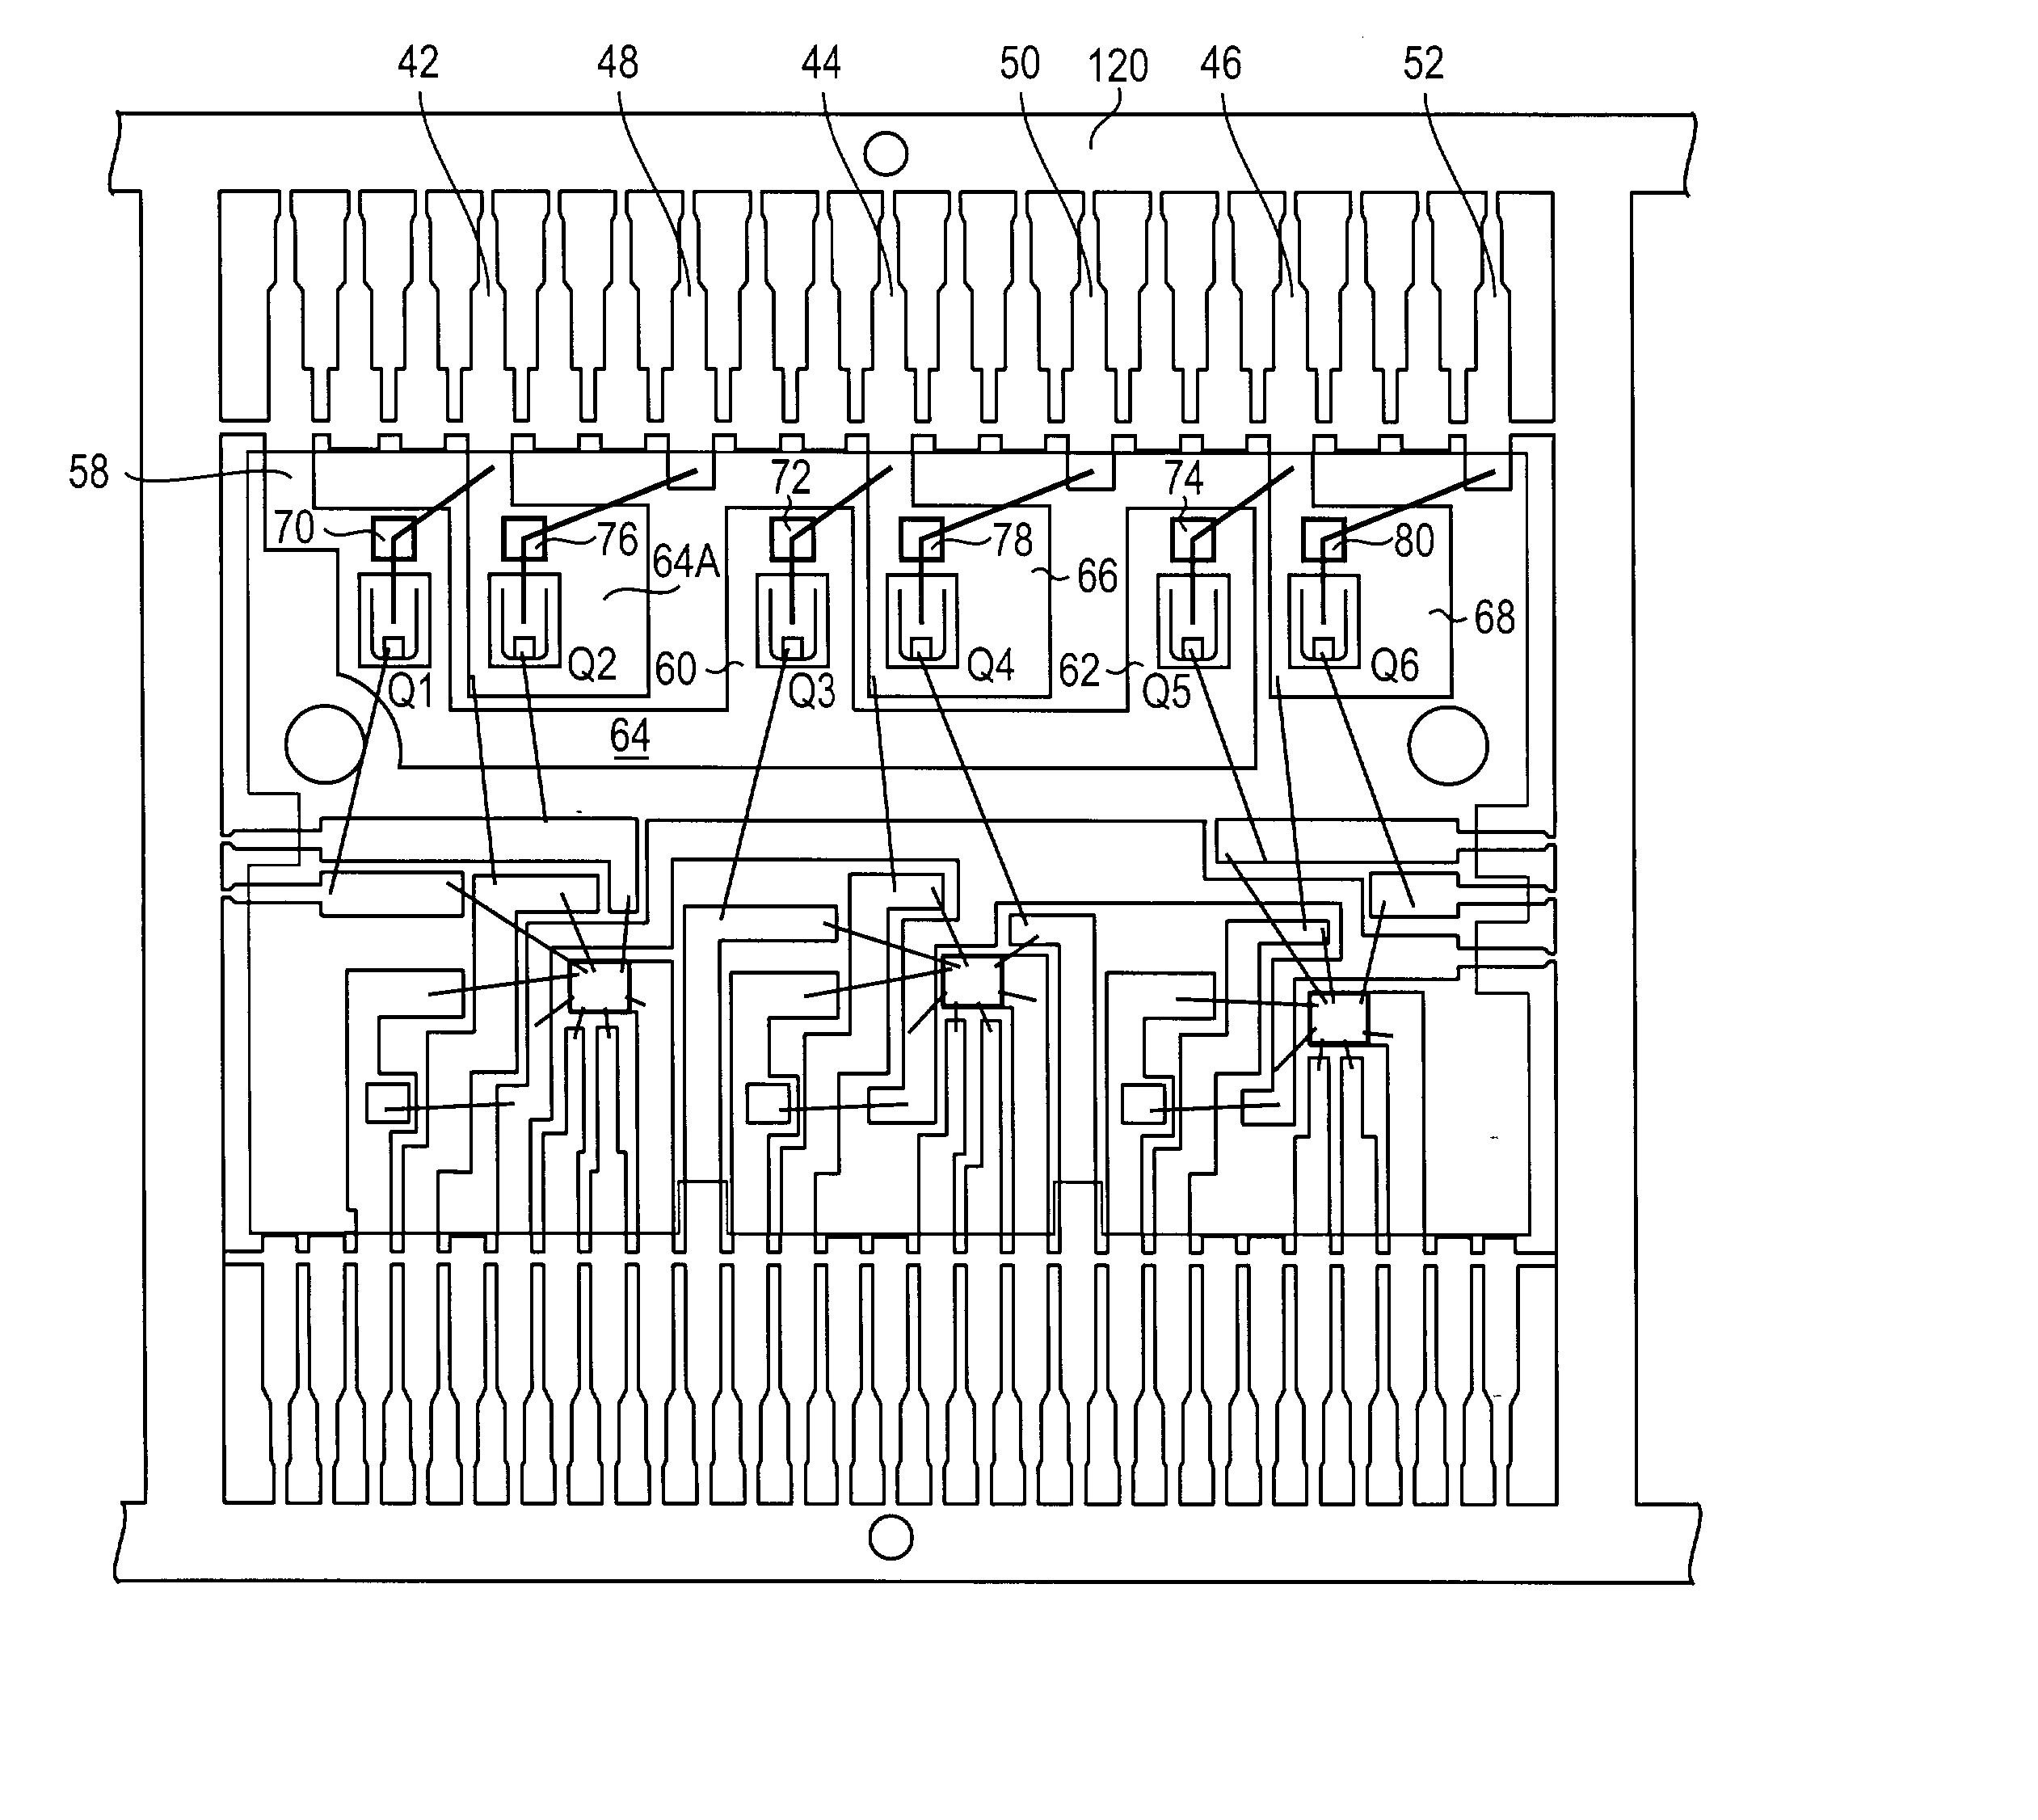 Intelligent motor drive module with injection molded package